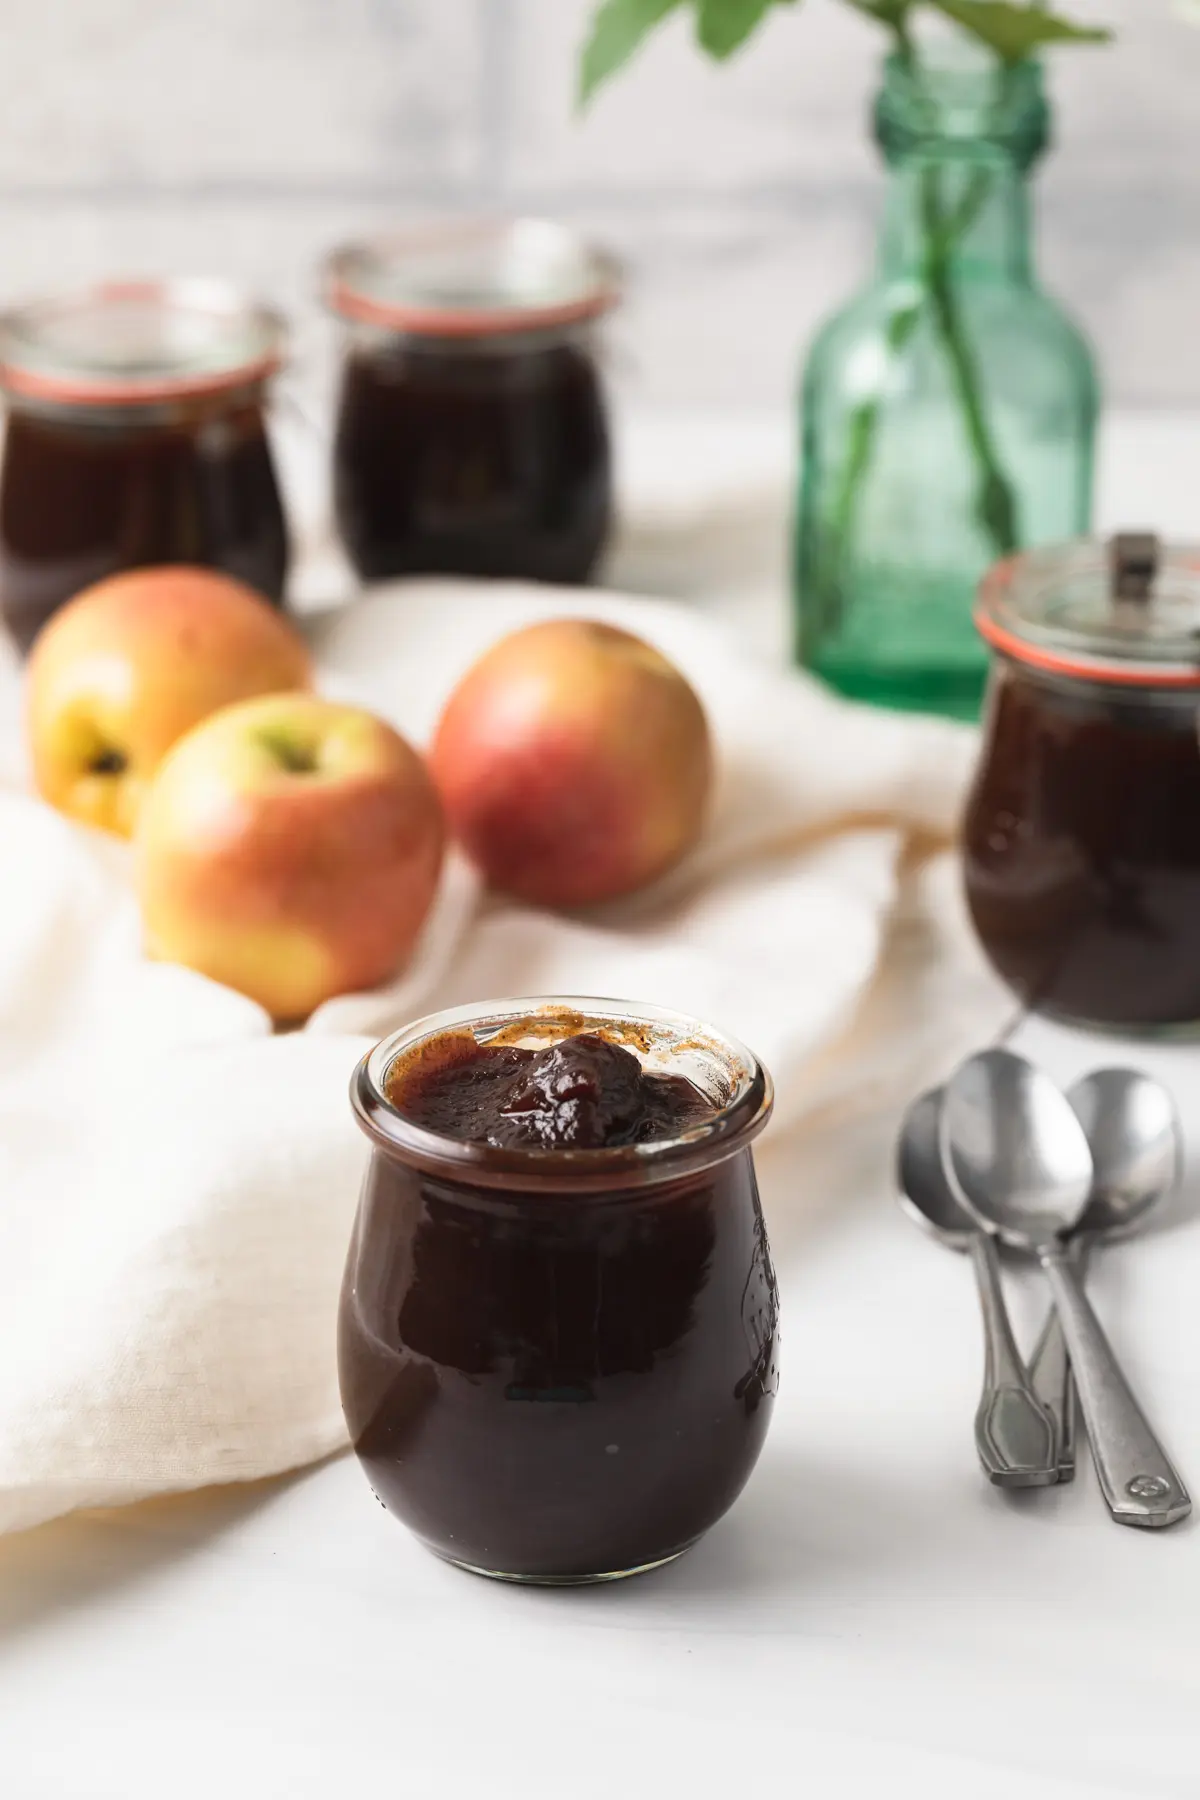 jars of apple butter with three apples and spoons nearby